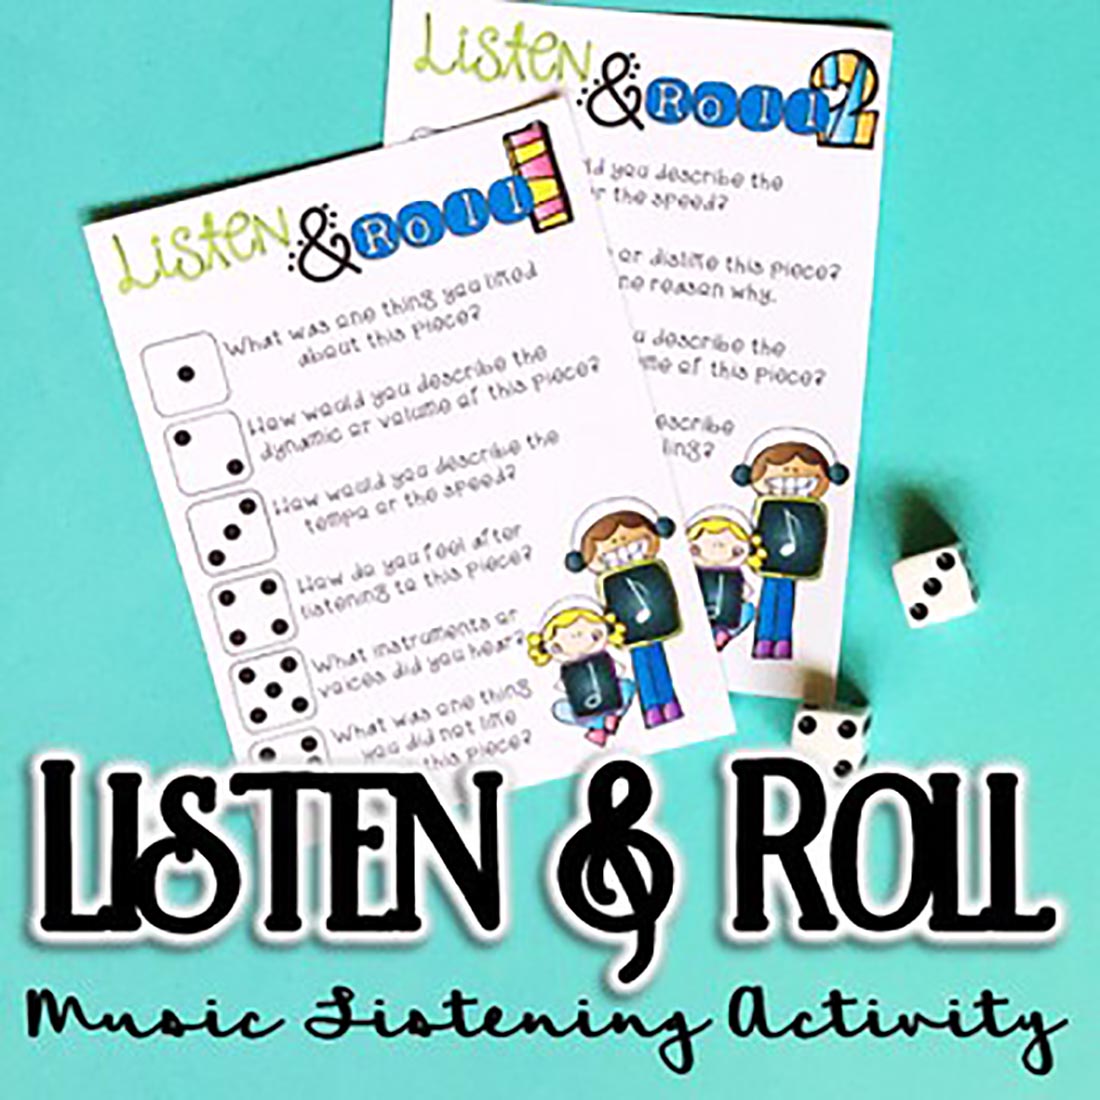 Listen & Roll, Music Listening preview image.